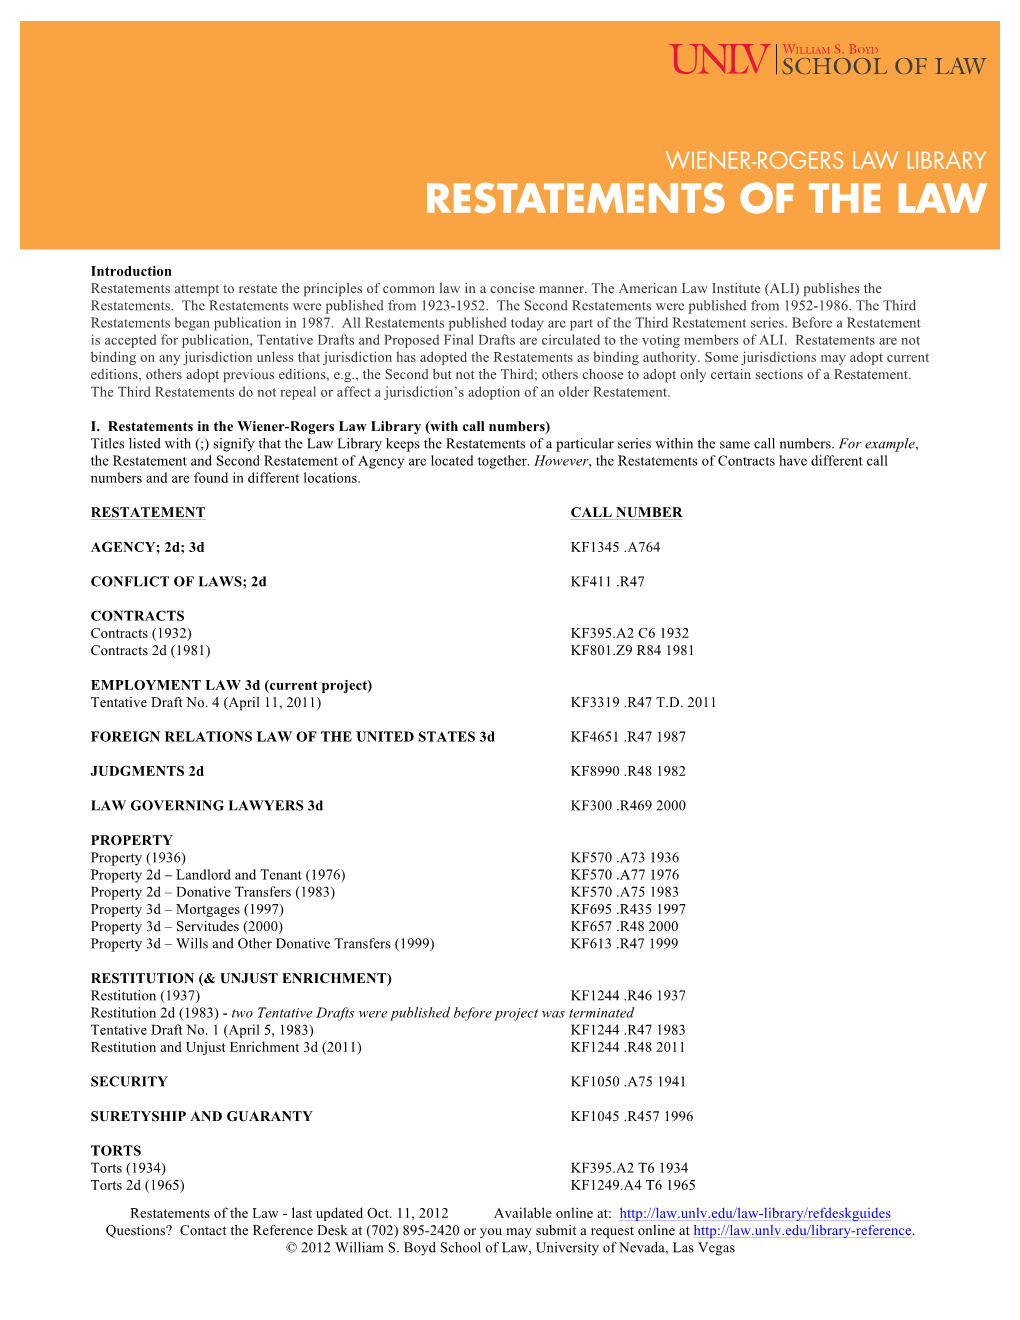 Restatements of the Law Research Guide